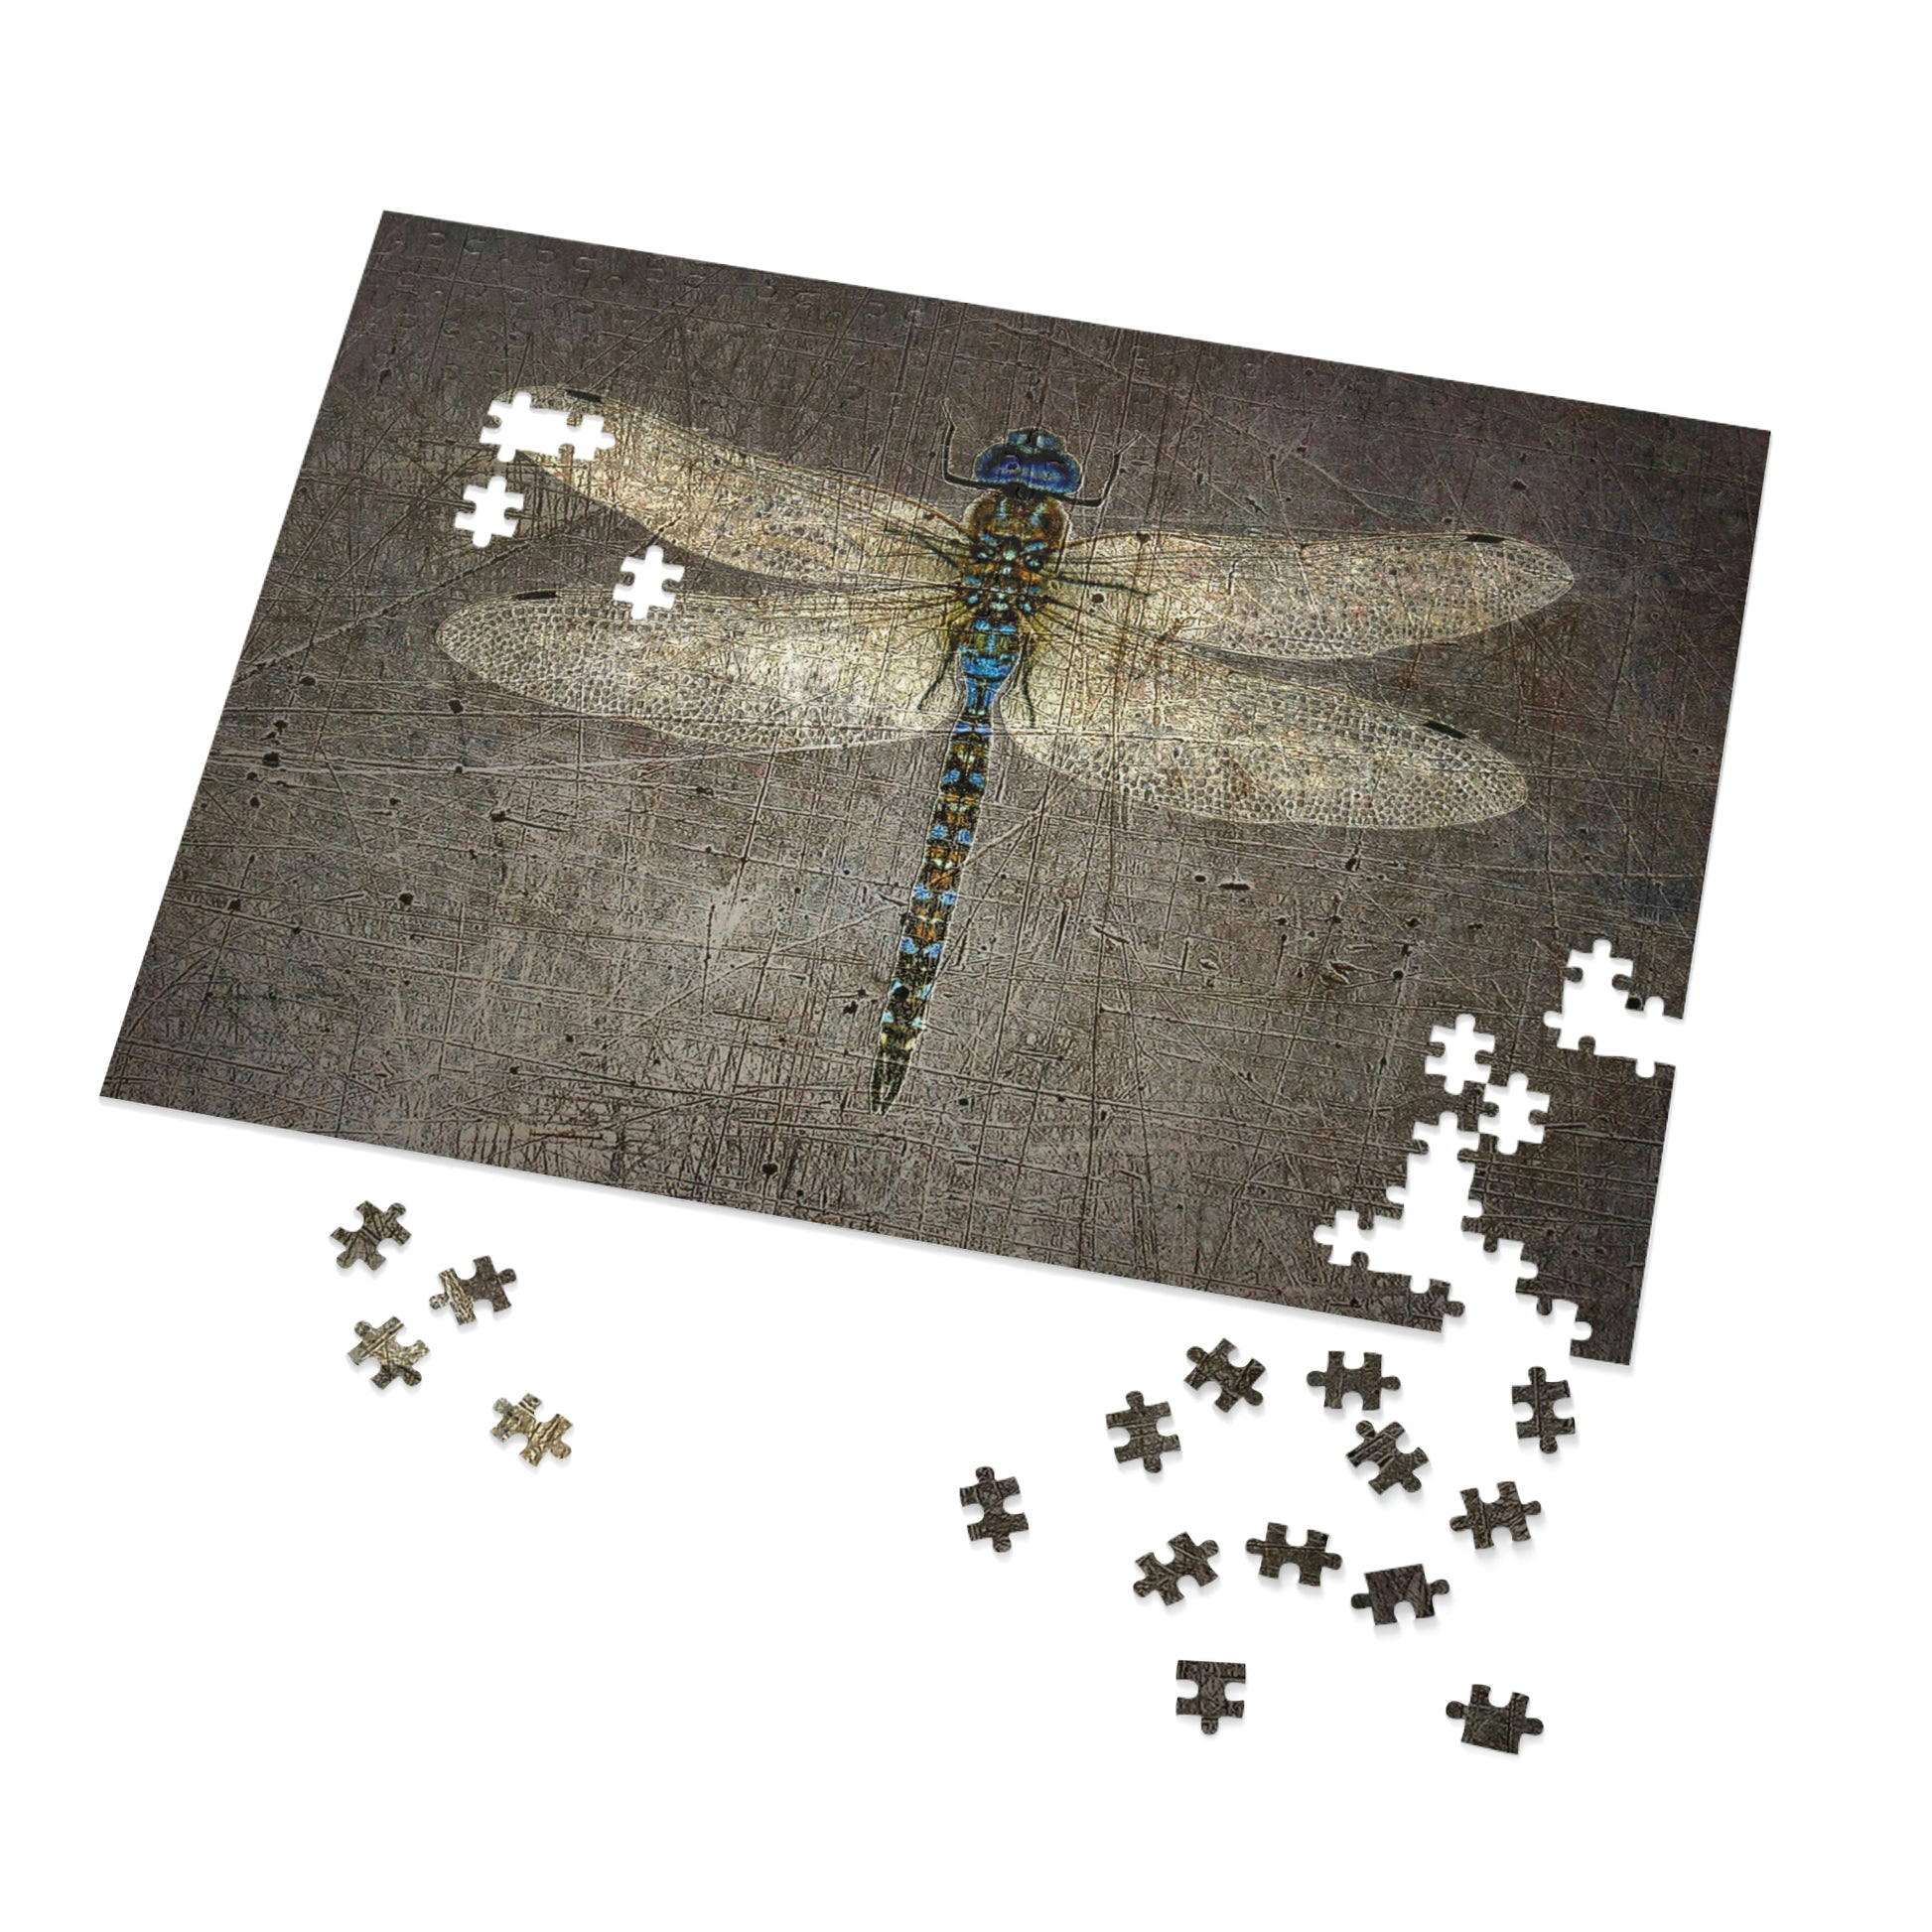 Dragonfly on Distressed Granite Background Puzzle 500 pieces in progress